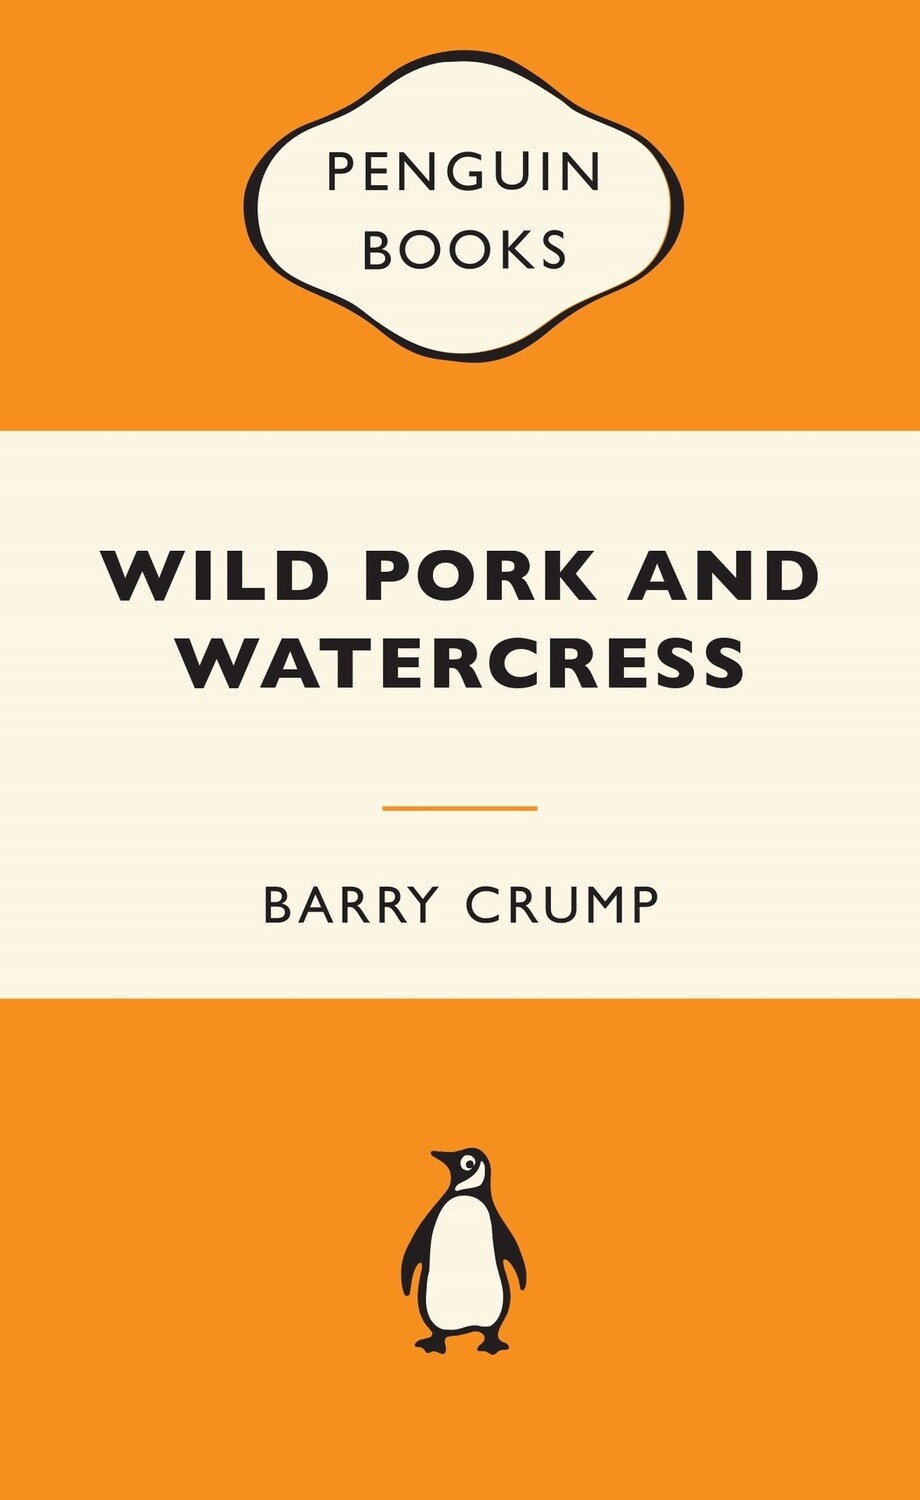 Wild Pork and Watercress by Barry Crump (Penguin Classics)